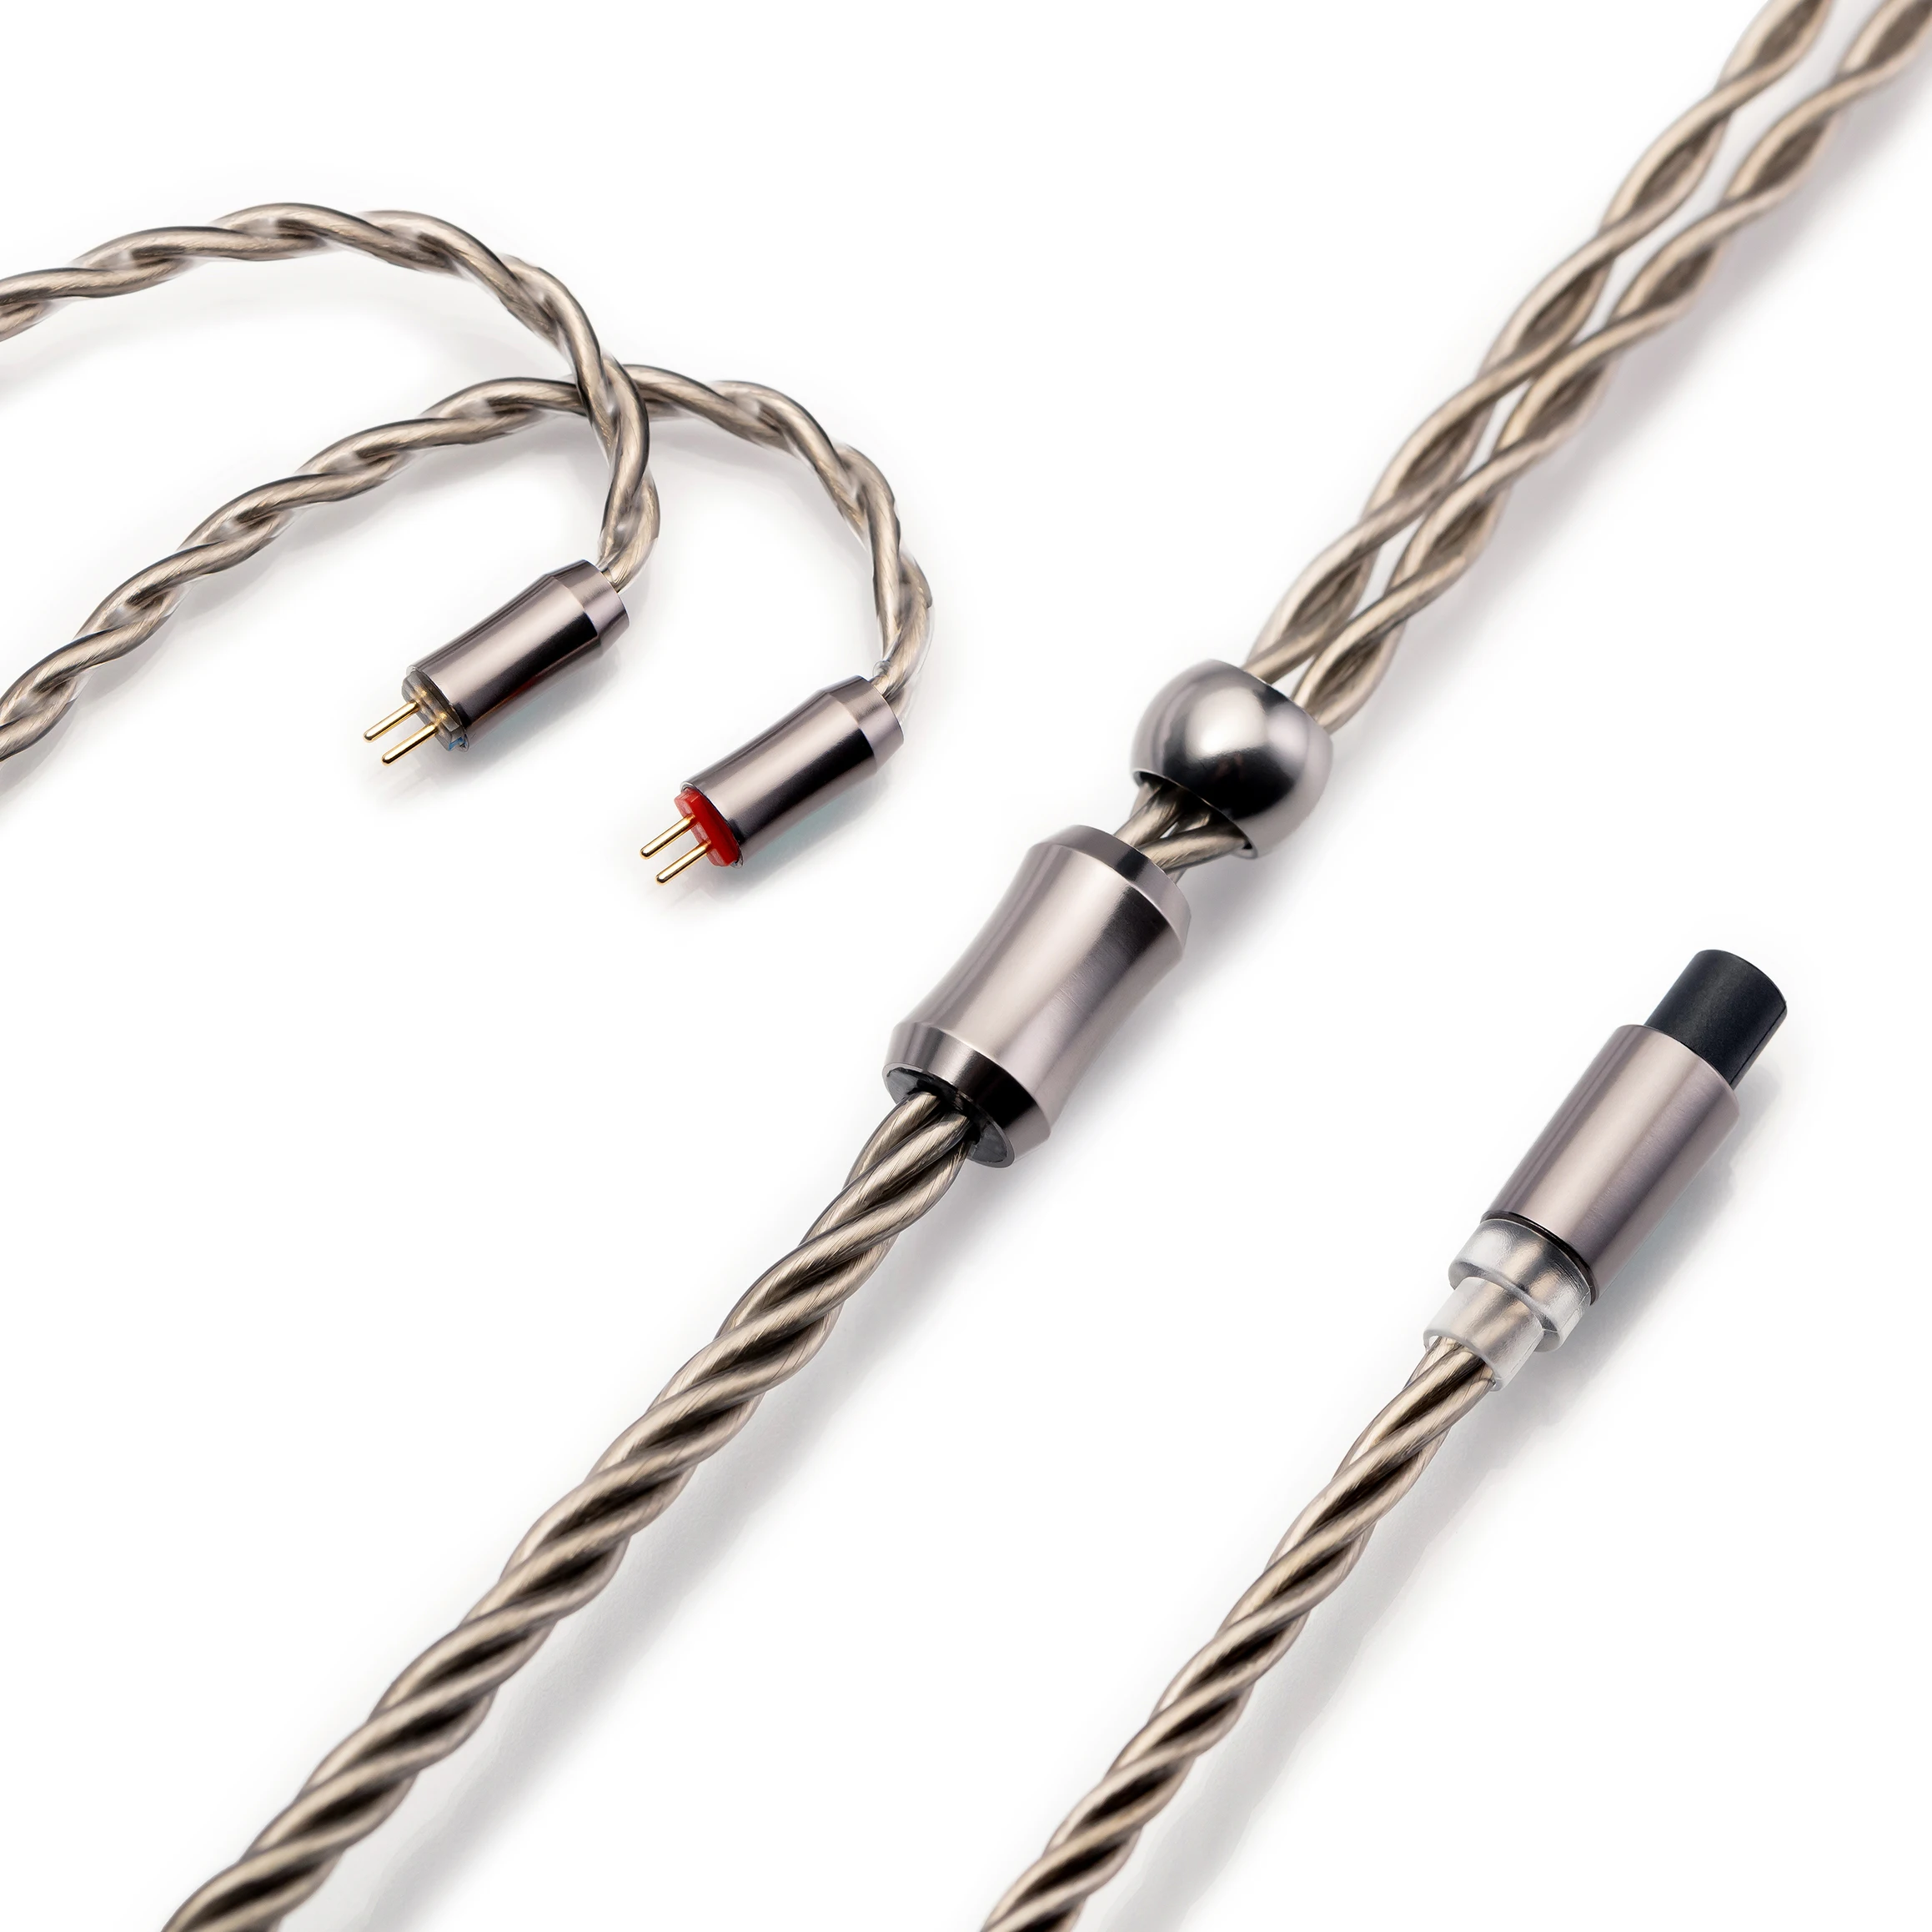 

Kinera Dromi Modular Upgrade Cable (2.5+3.5+4.4), 6N OCC with Silver Plated,4 Core Twist Braided, 0.78 2pin / MMCX Connector